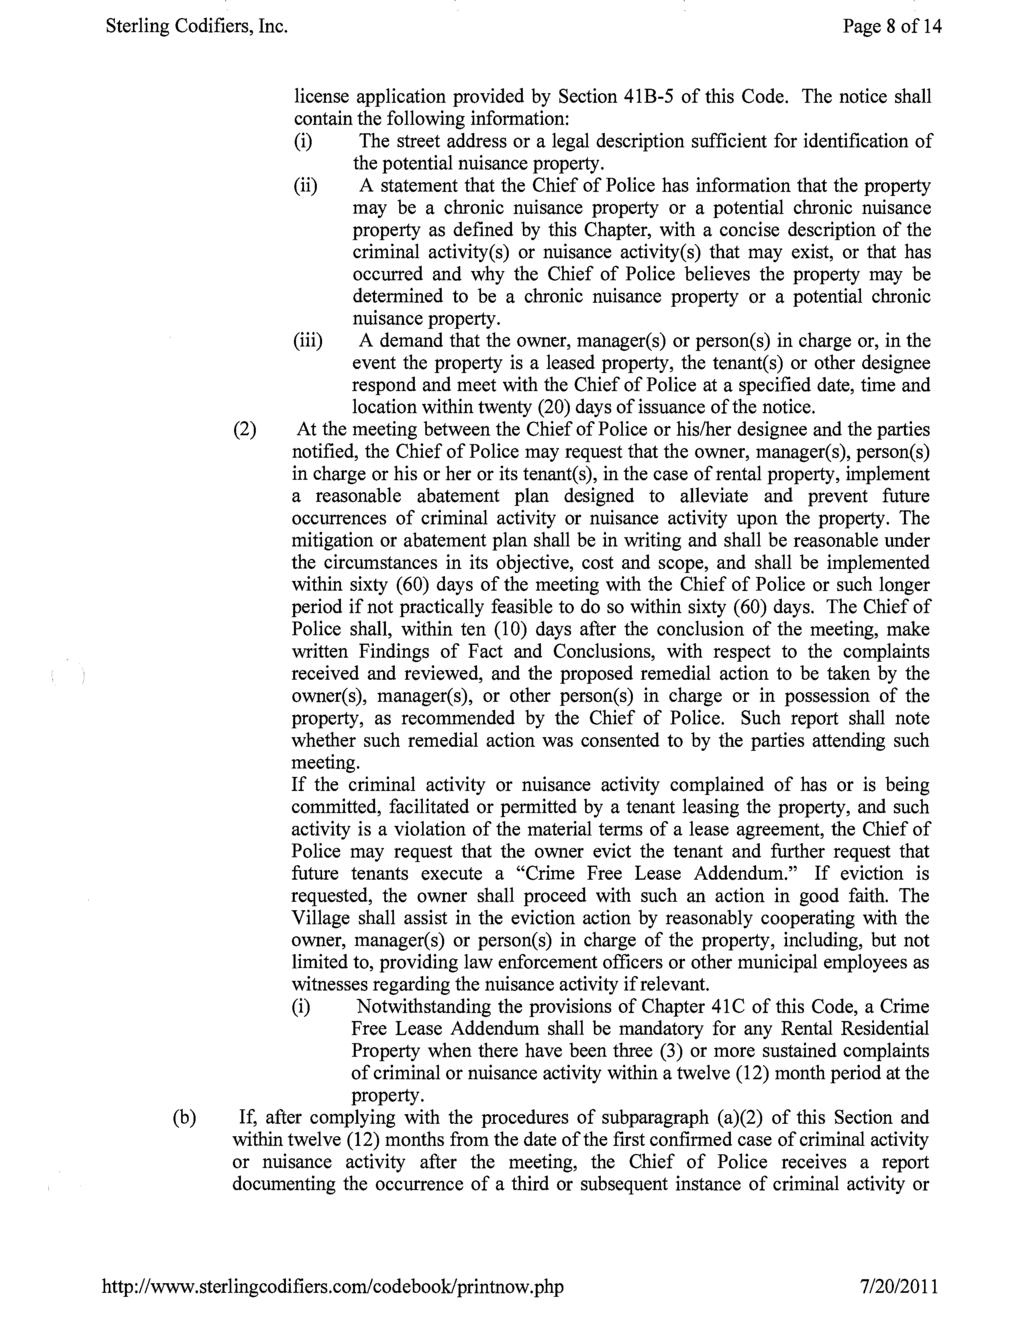 Sterling Codifiers, Inc. Page 8 of 14 (b) license application provided by Section 41B-5 of this Code.